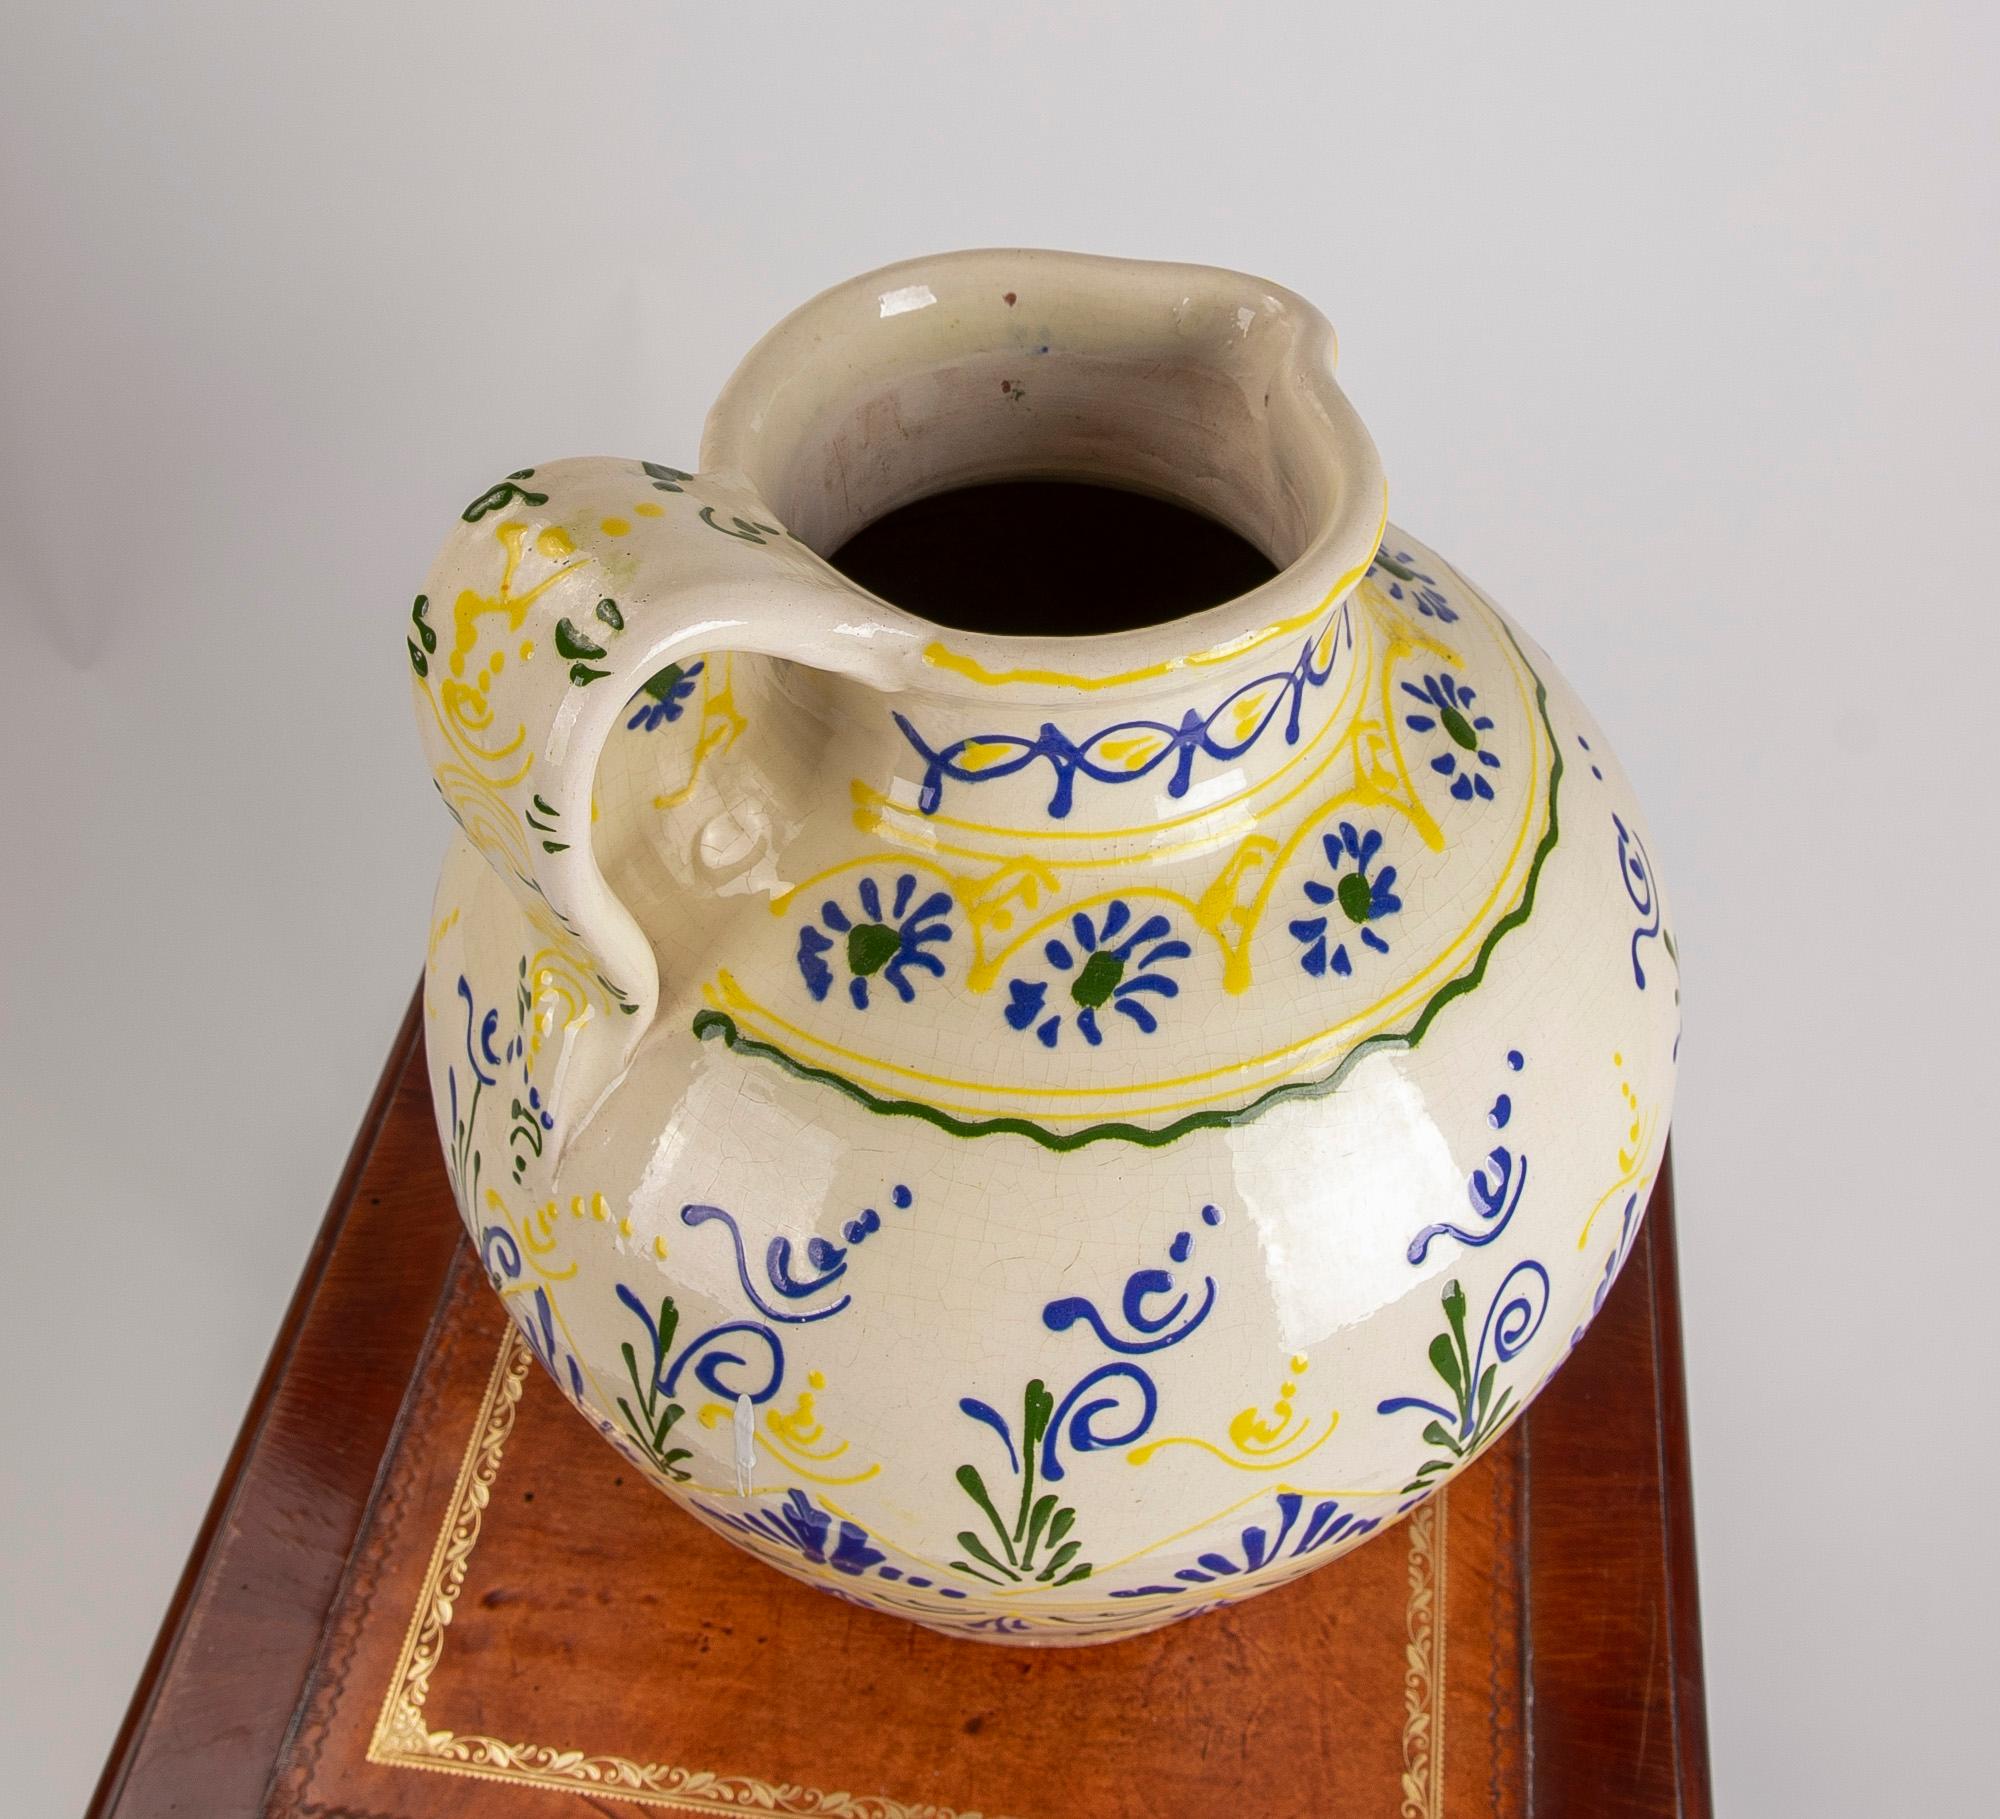 1980s Spanish Hand-Painted Ceramic Jug with Handle for Wine For Sale 4